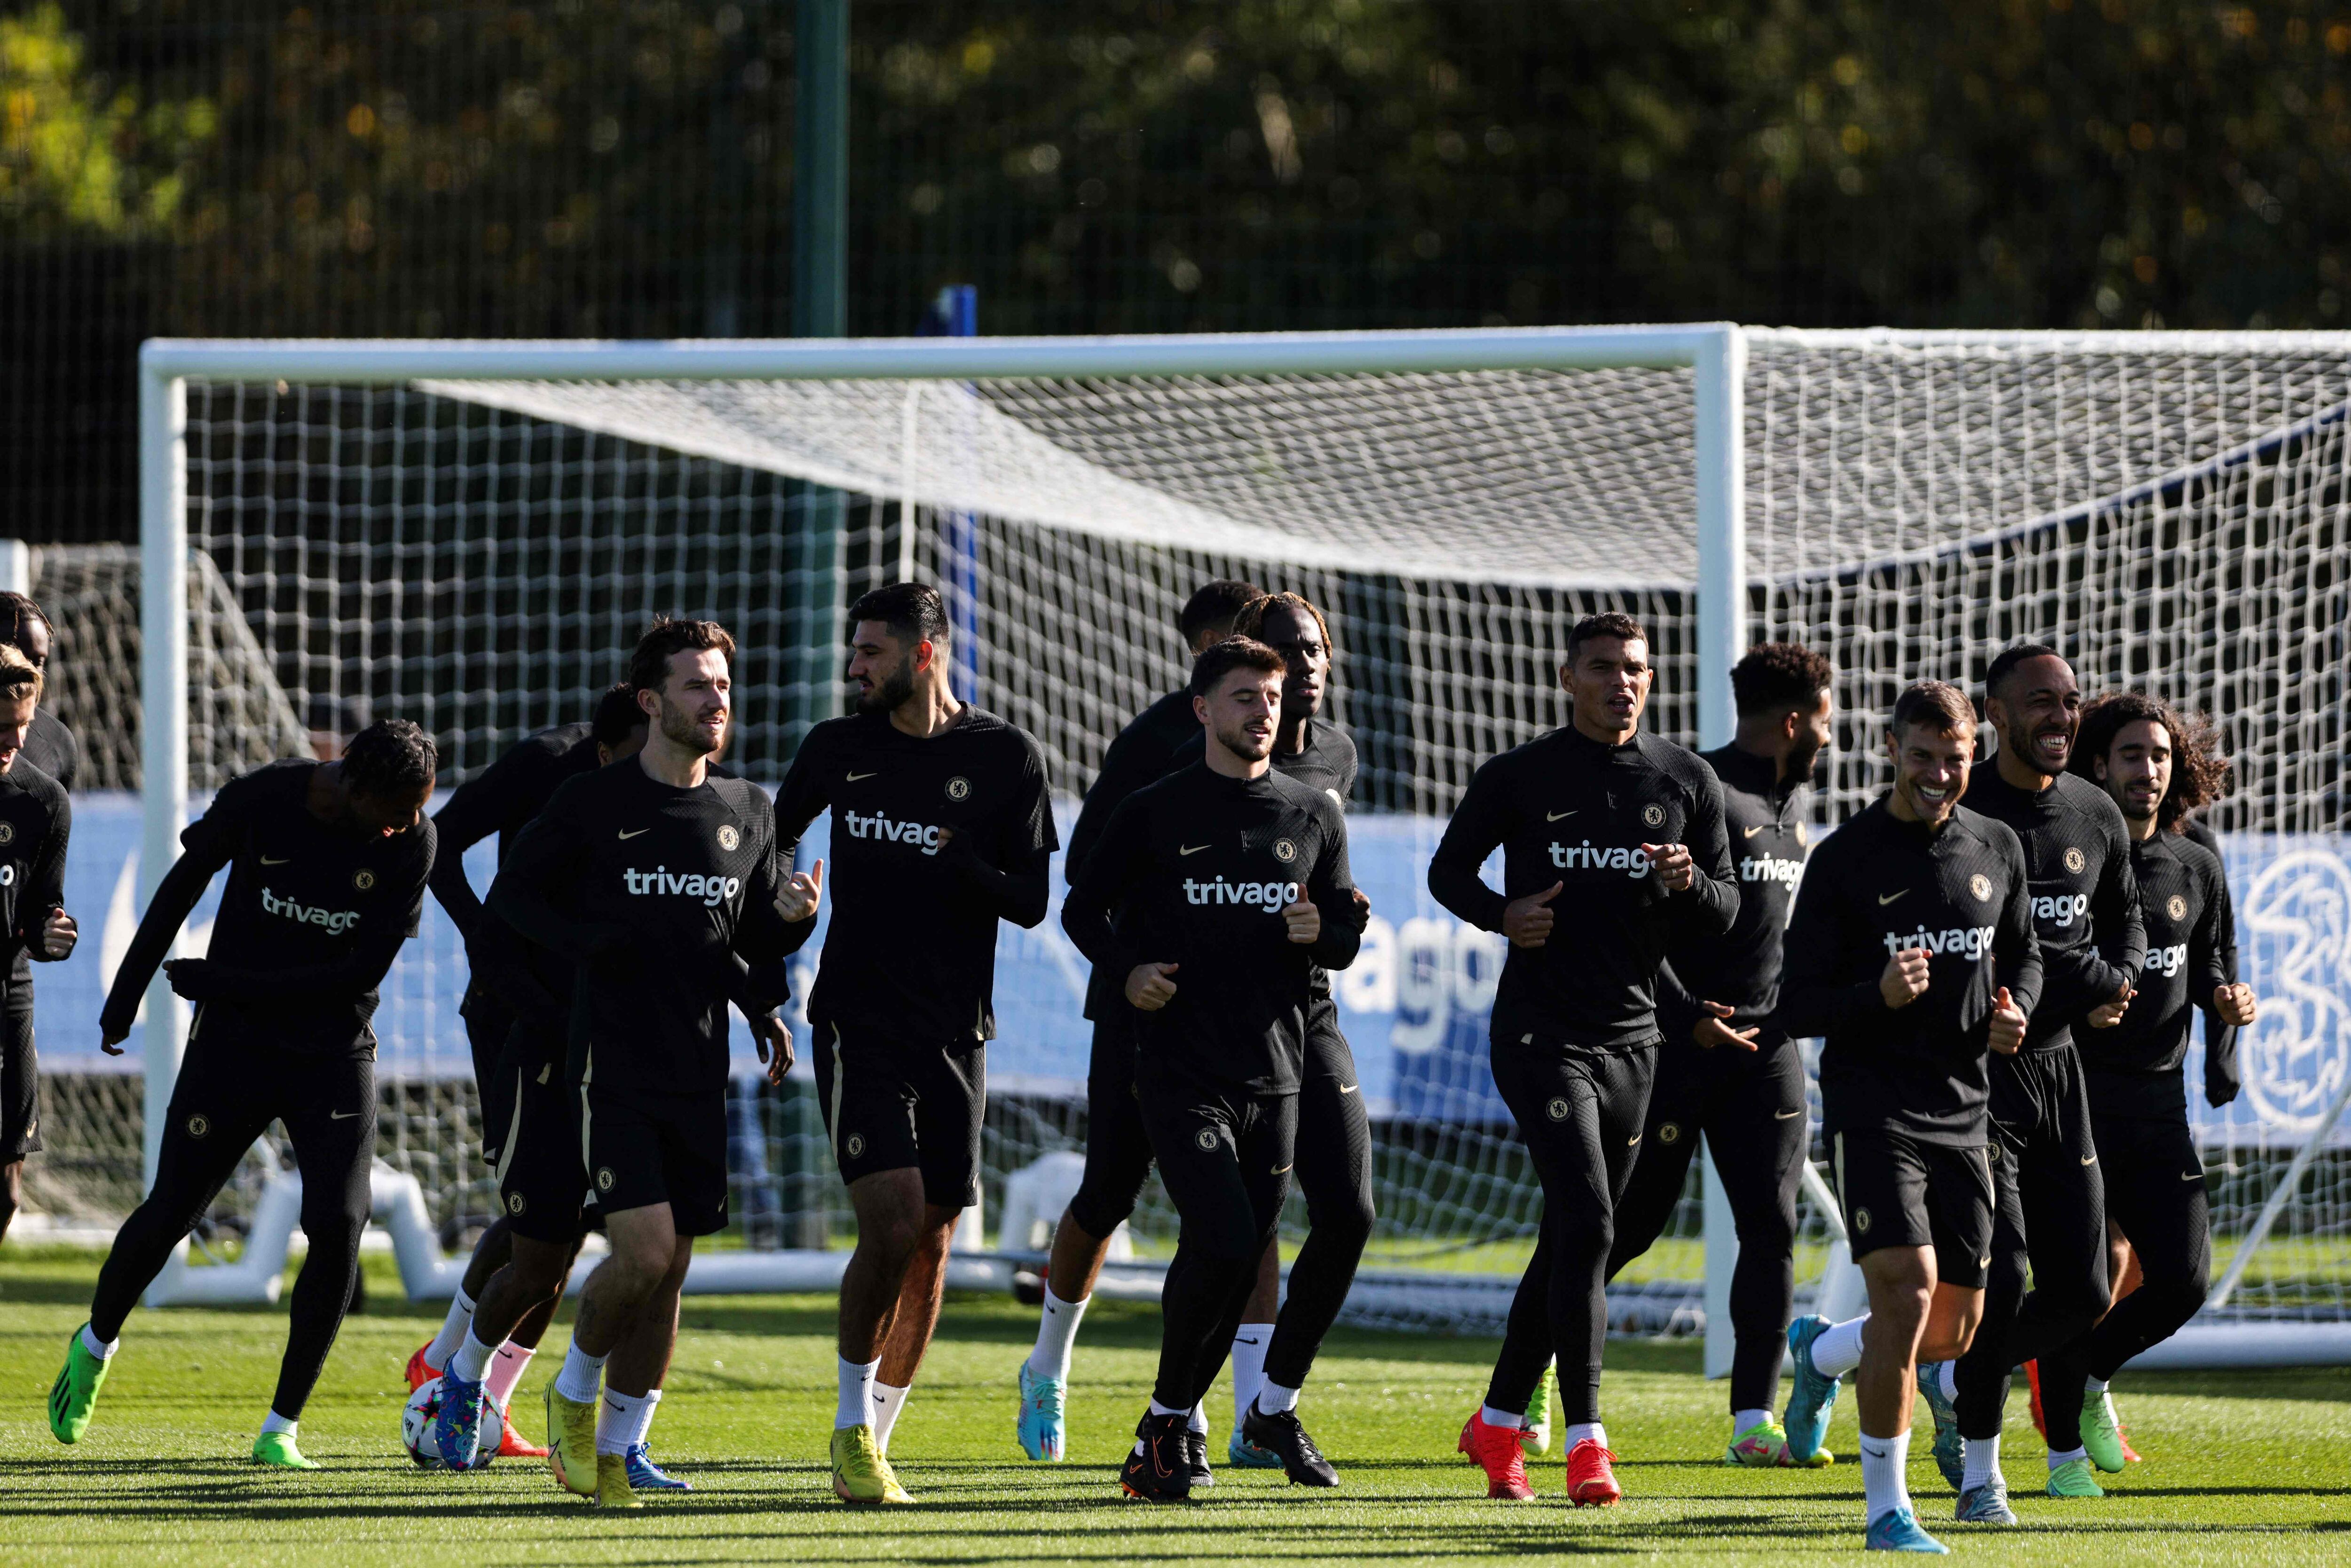 Chelsea's players attend a team training session at Chelsea's Cobham training facility in Stoke D'Abernon, southwest of London on October 10, 2022, on the eve of their UEFA Champions League group E football match against AC Milan. (Photo by Adrian DENNIS / AFP)